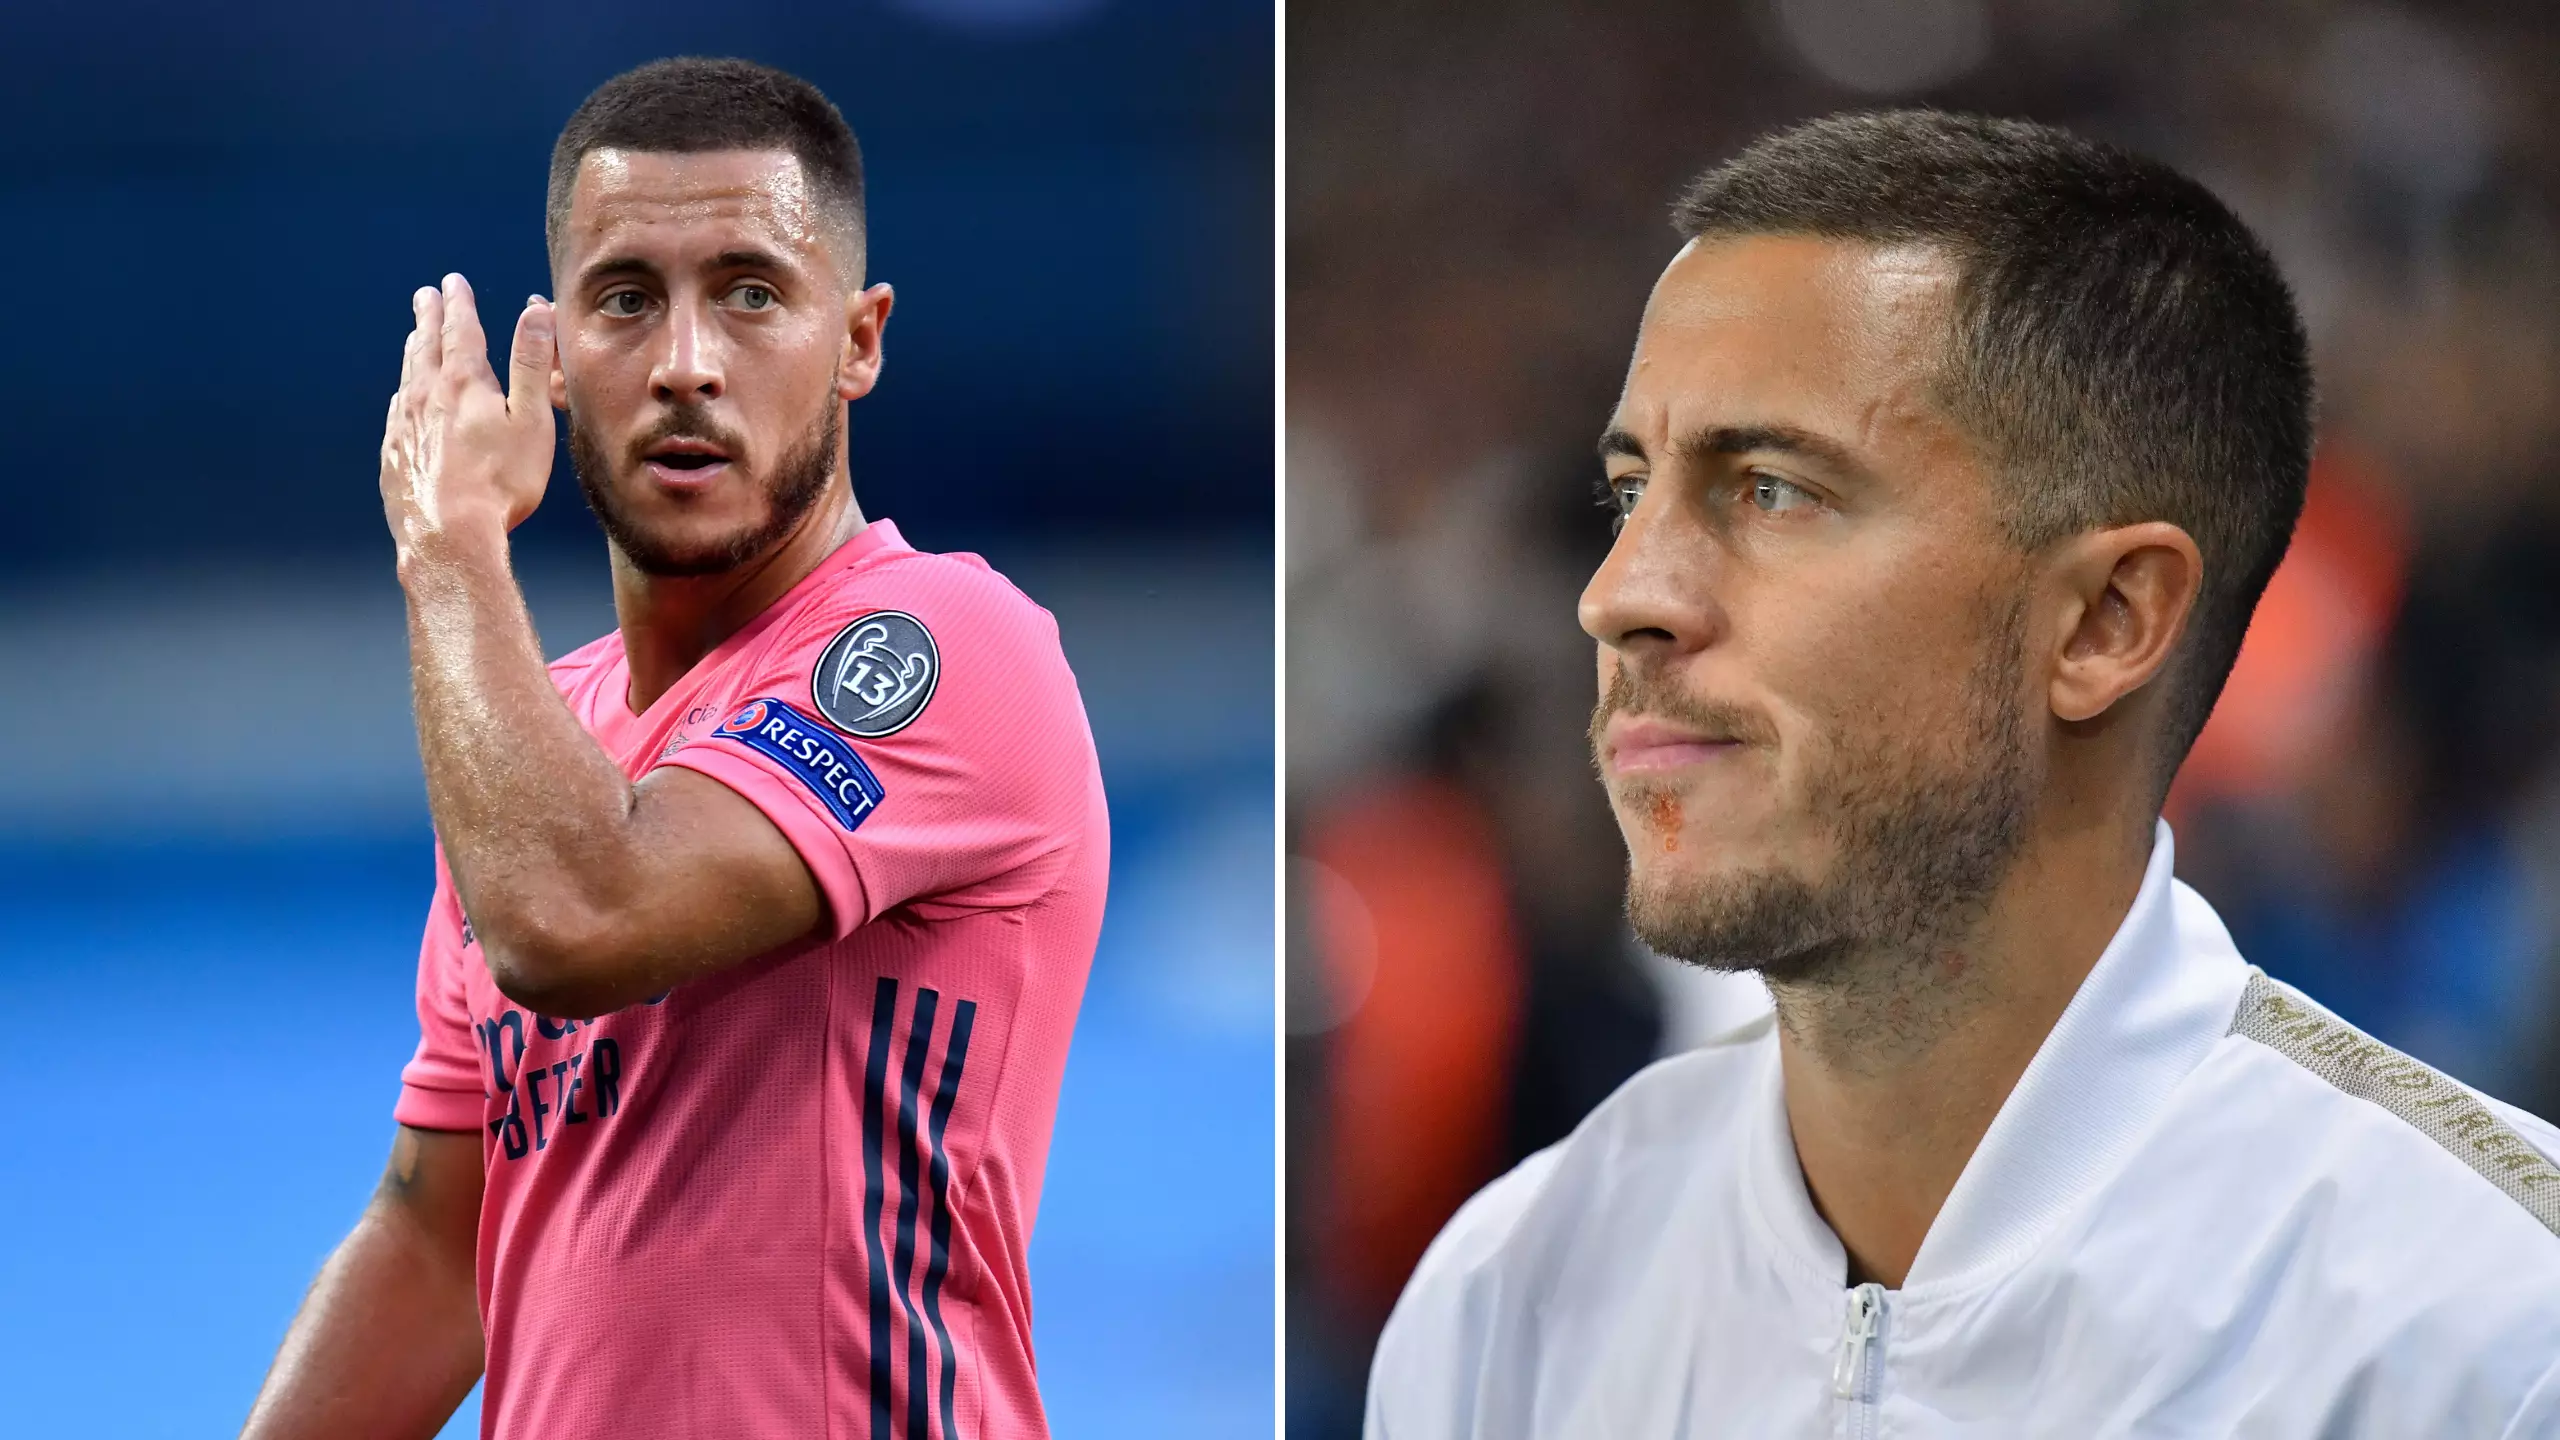 Eden Hazard's Transfer Value Has Dropped By An Astonishing €90 Million Since Joining Real Madrid